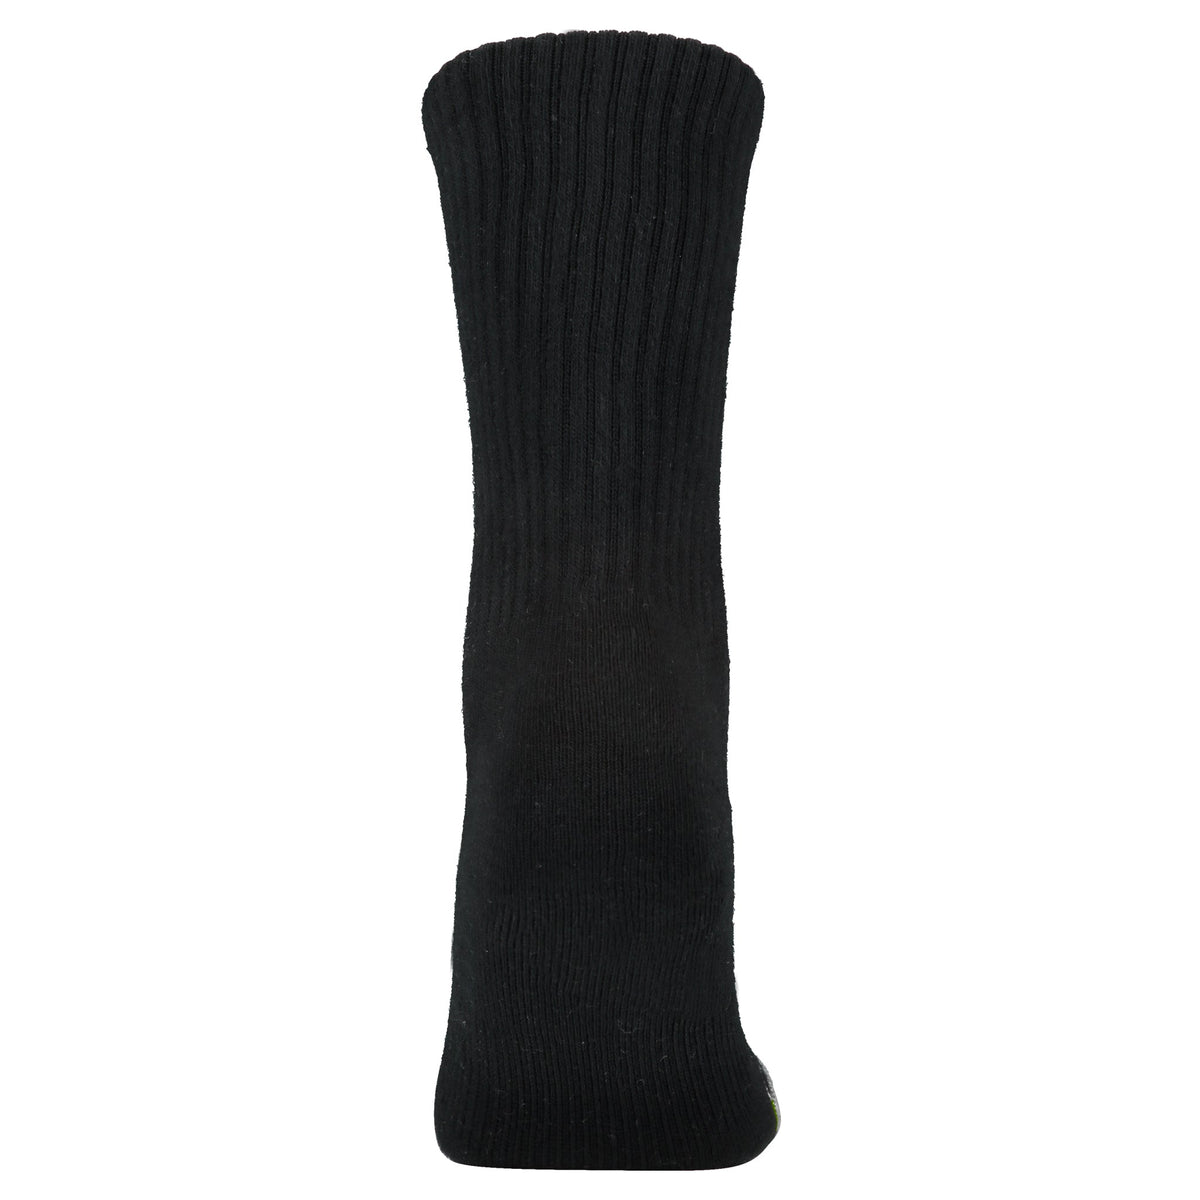 Crossfly men&#39;s Original Crew Socks in black from the Everyday series, featuring Flat Toe Seams and 360 Hold.